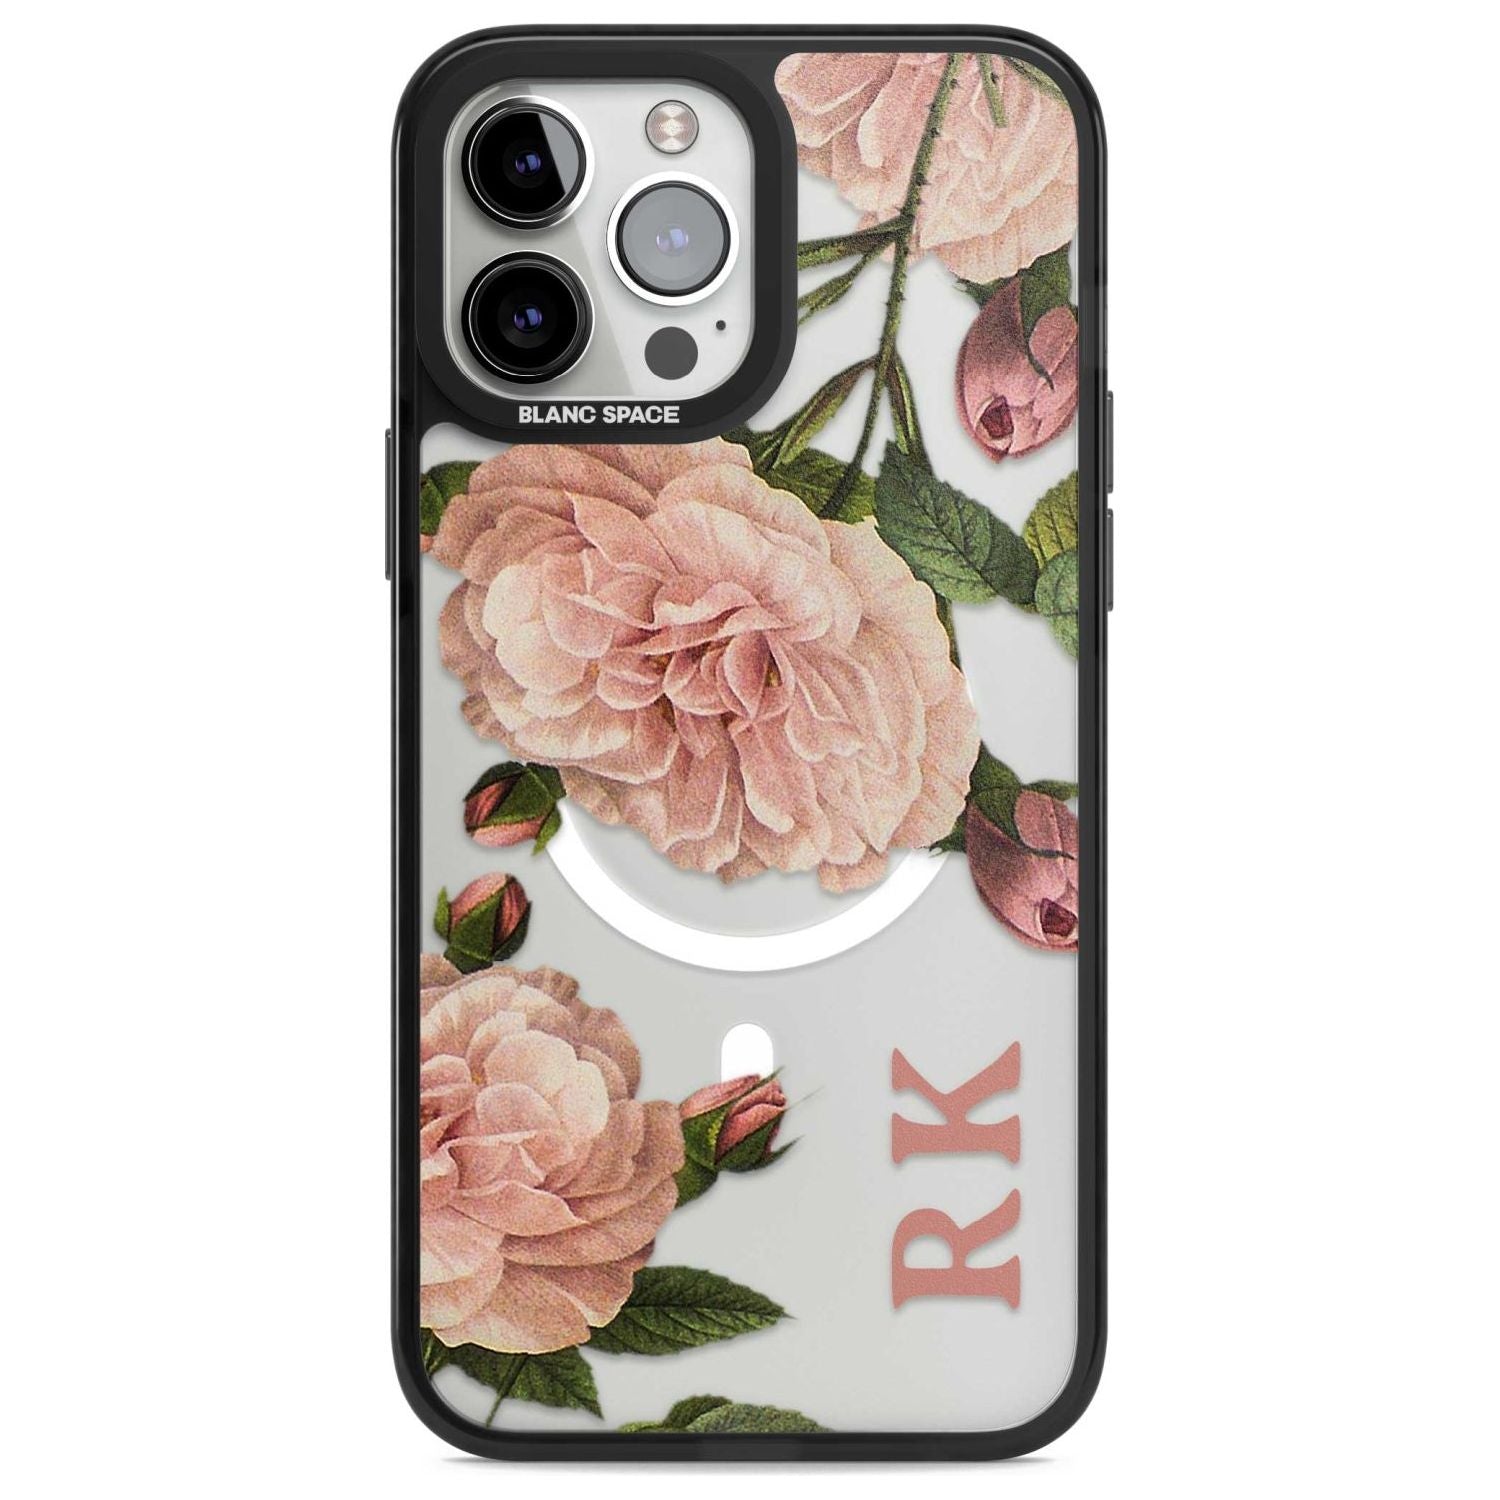 Personalised Clear Vintage Floral Pale Pink Peonies Custom Phone Case iPhone 13 Pro Max / Magsafe Black Impact Case Blanc Space